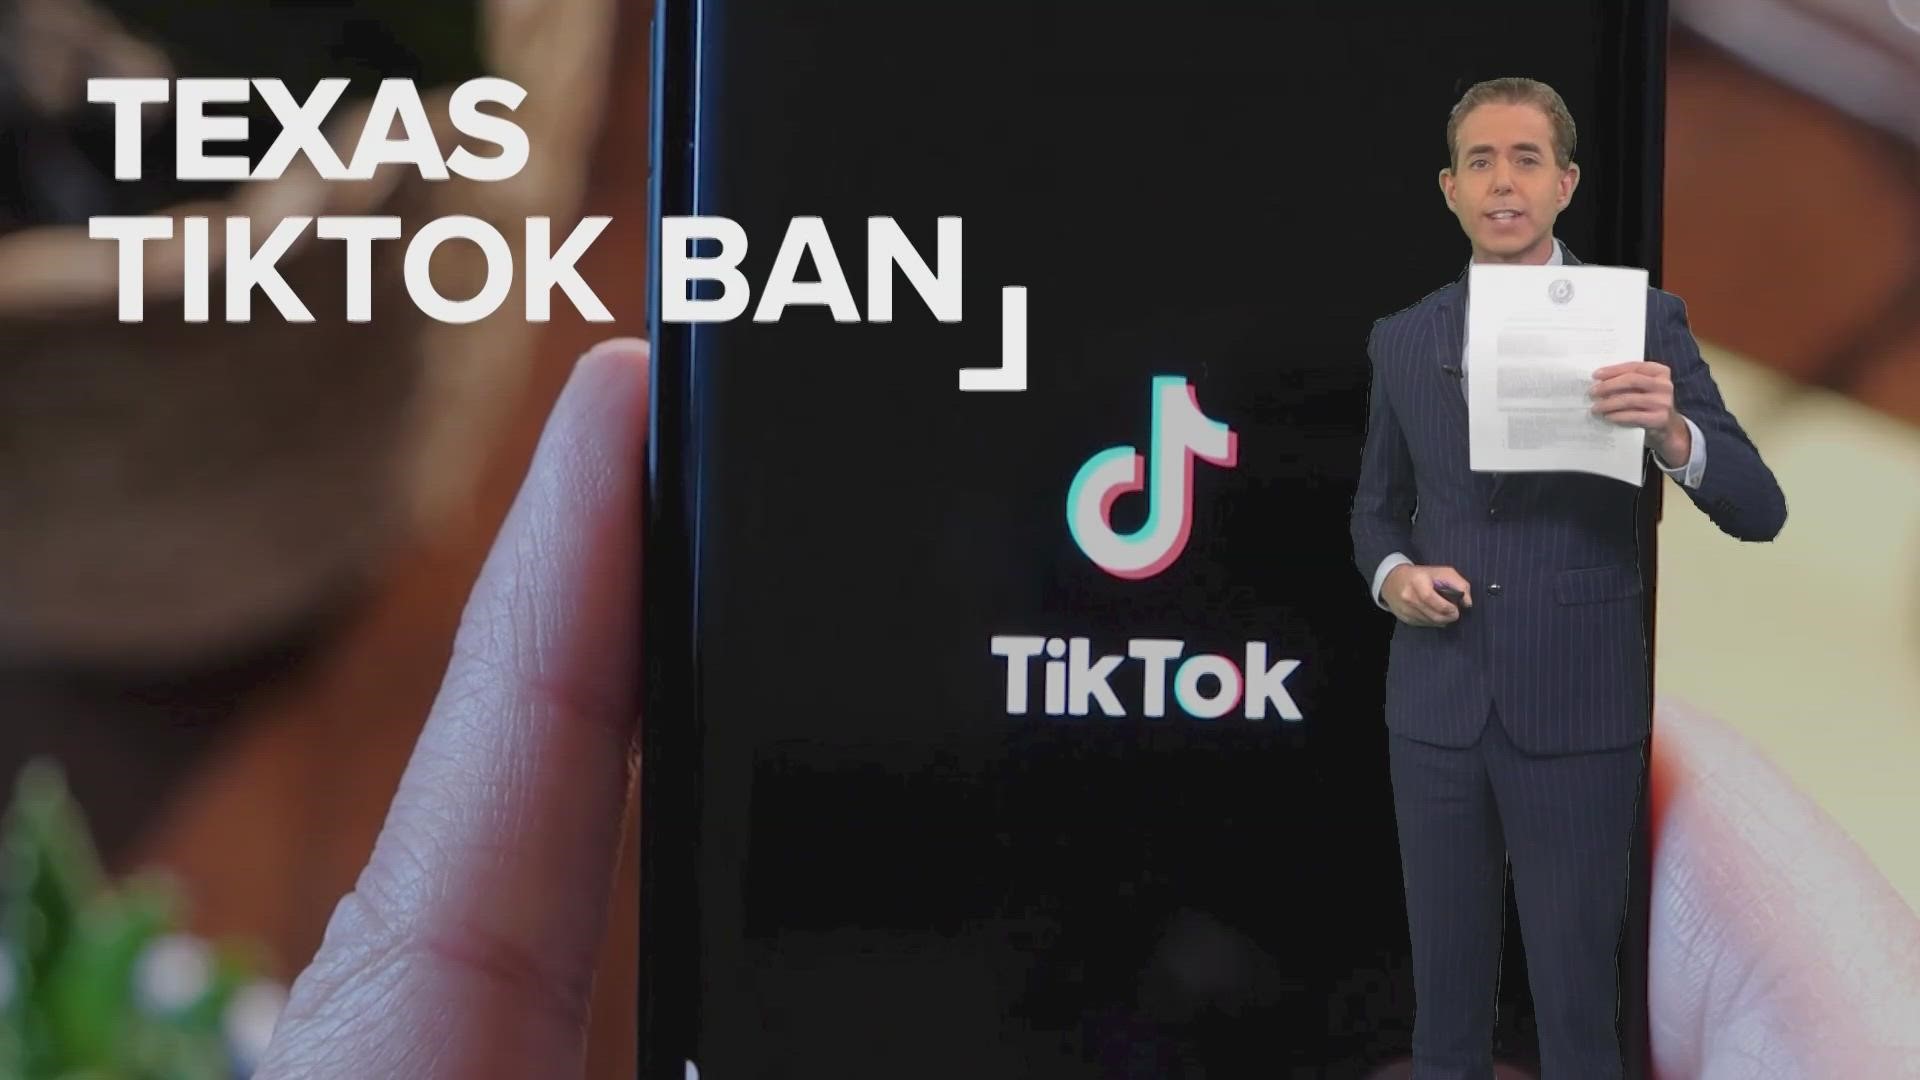 Personal devices used to conduct gov't business would be banned from downloading or using TikTok too.